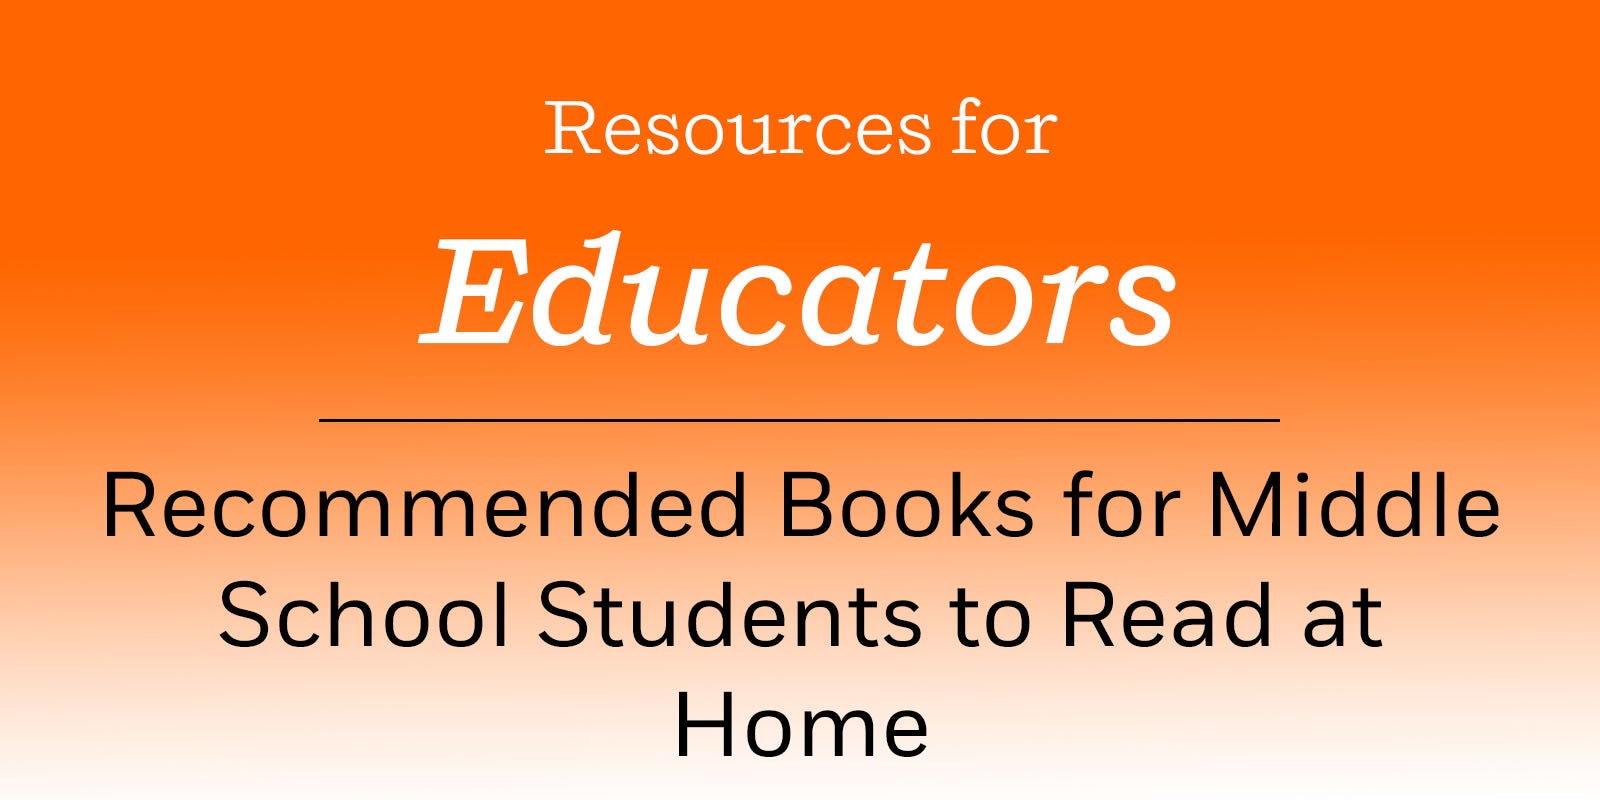 Recommended Books for Middle School Students to Read at Home